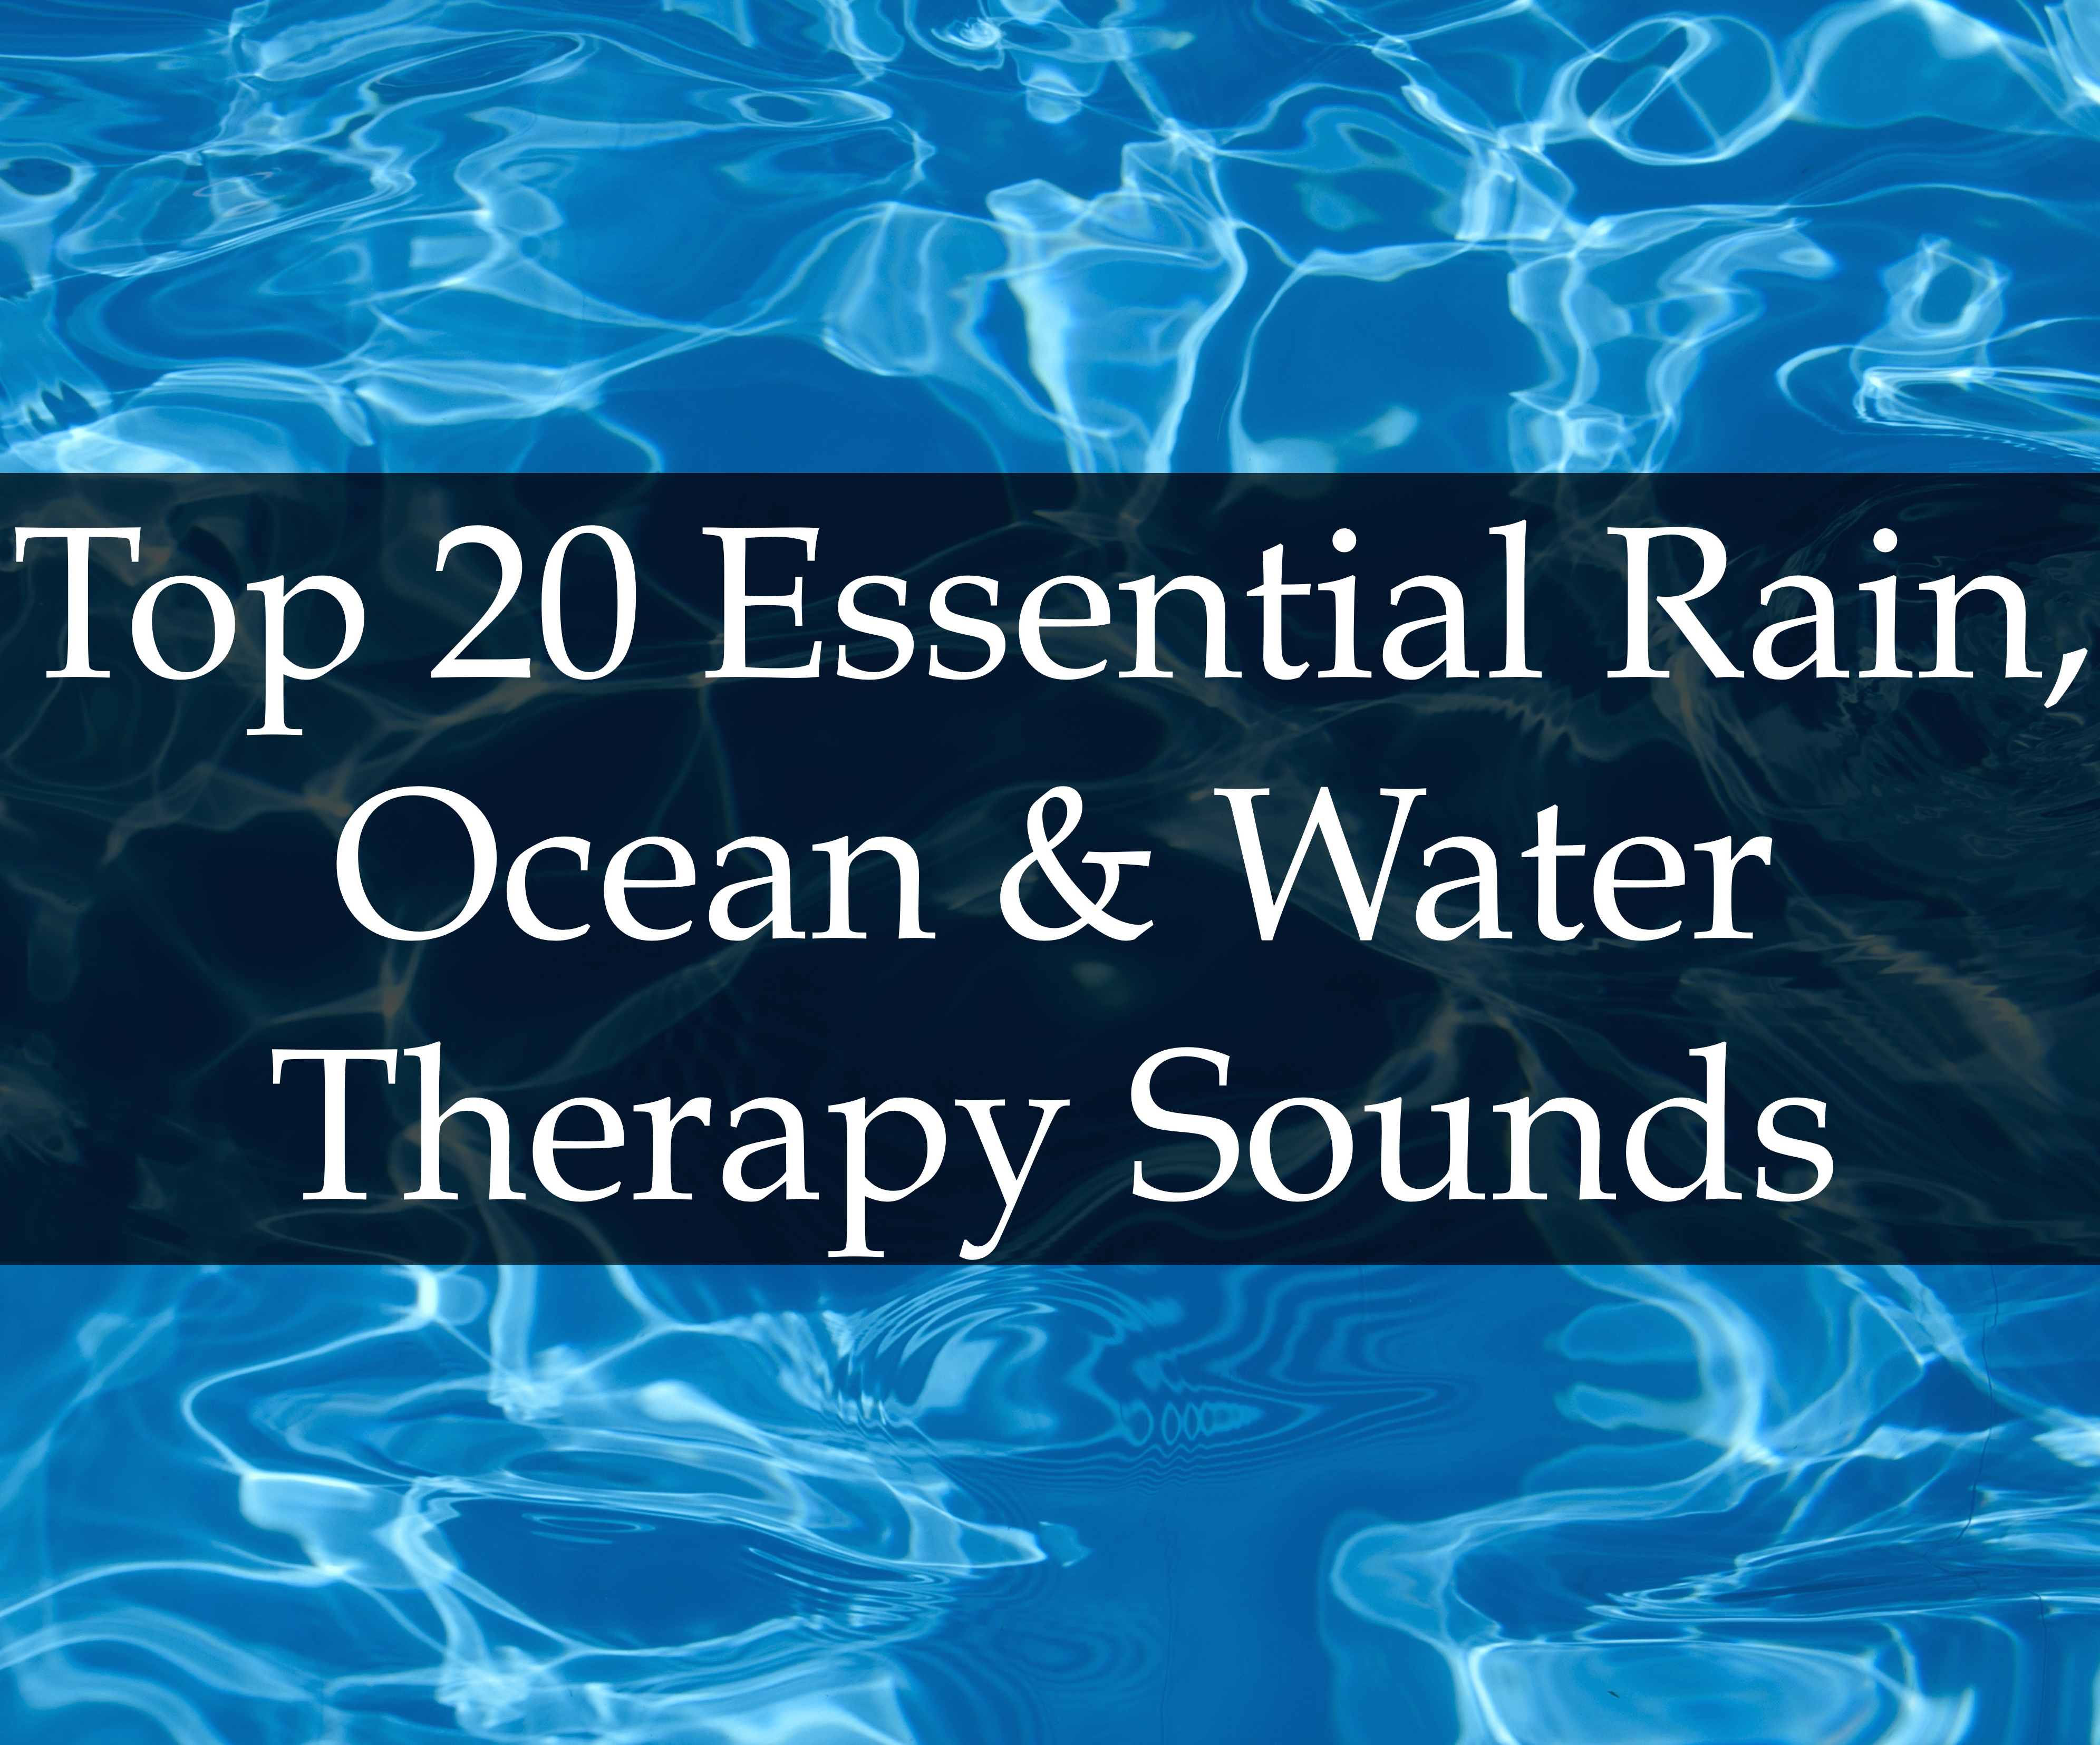 Top 20 Essential Rain, Ocean & Water Therapy Sounds - Compilation of Relaxing Water Sounds to Relieve Stress and Anxiety, Help You Sleep, and Improve  Mental Health, Sleep and Creativity